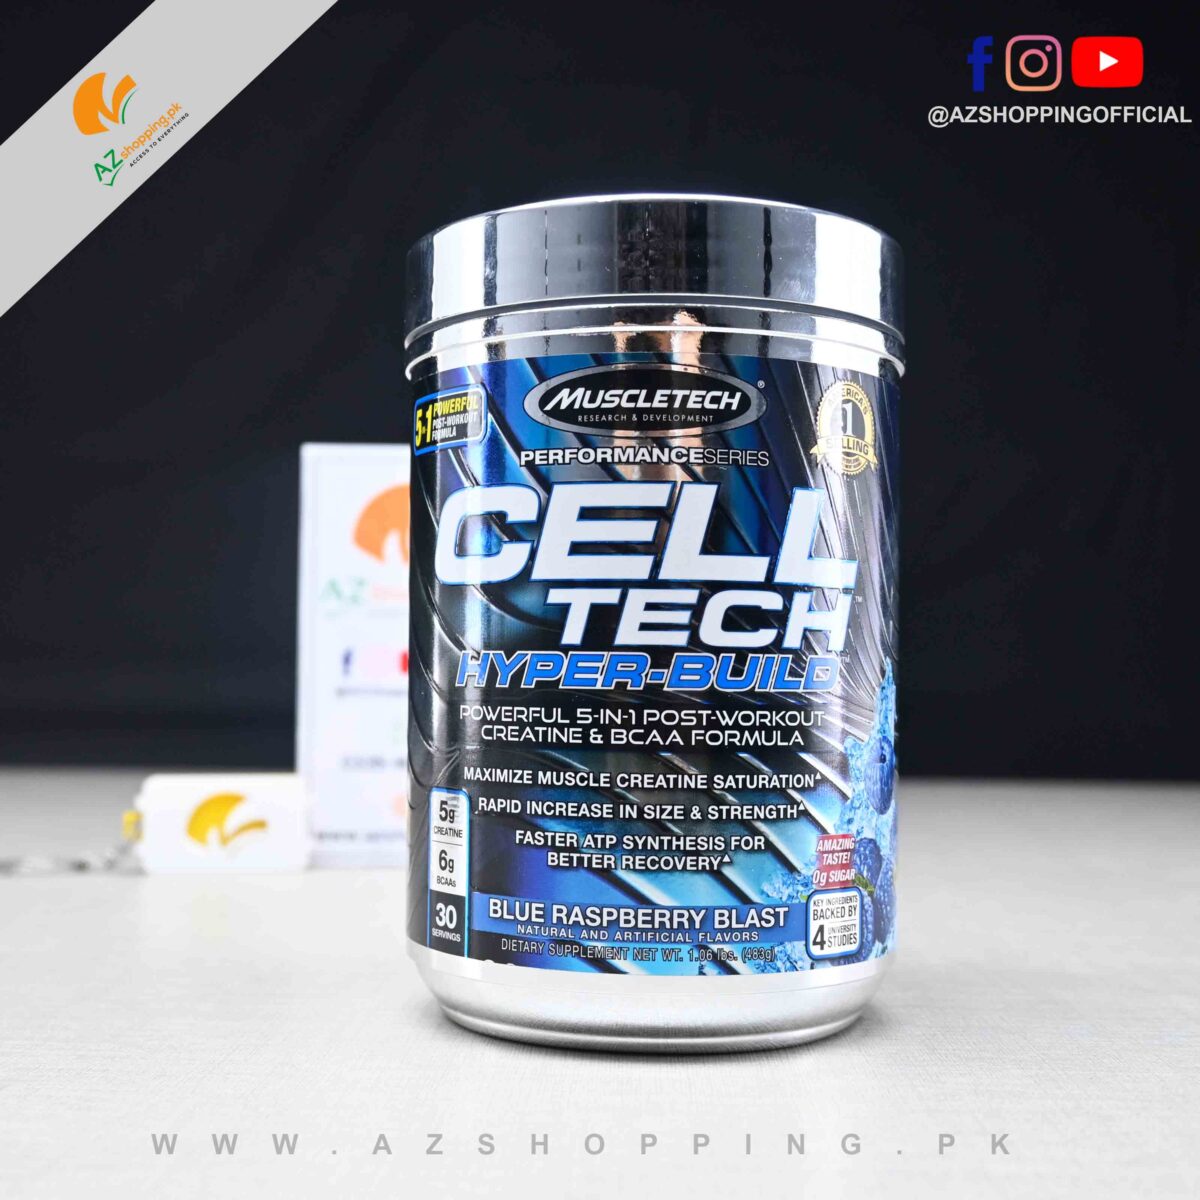 Muscletech – Cell Tech Hyper-Build Powerful 5-in-1 Post-Workout Creatine & BCAA Formula for Maximize Muscle Creatine Saturation, Rapid Increase in Size & Strength, Better Recovery – 30 Servings